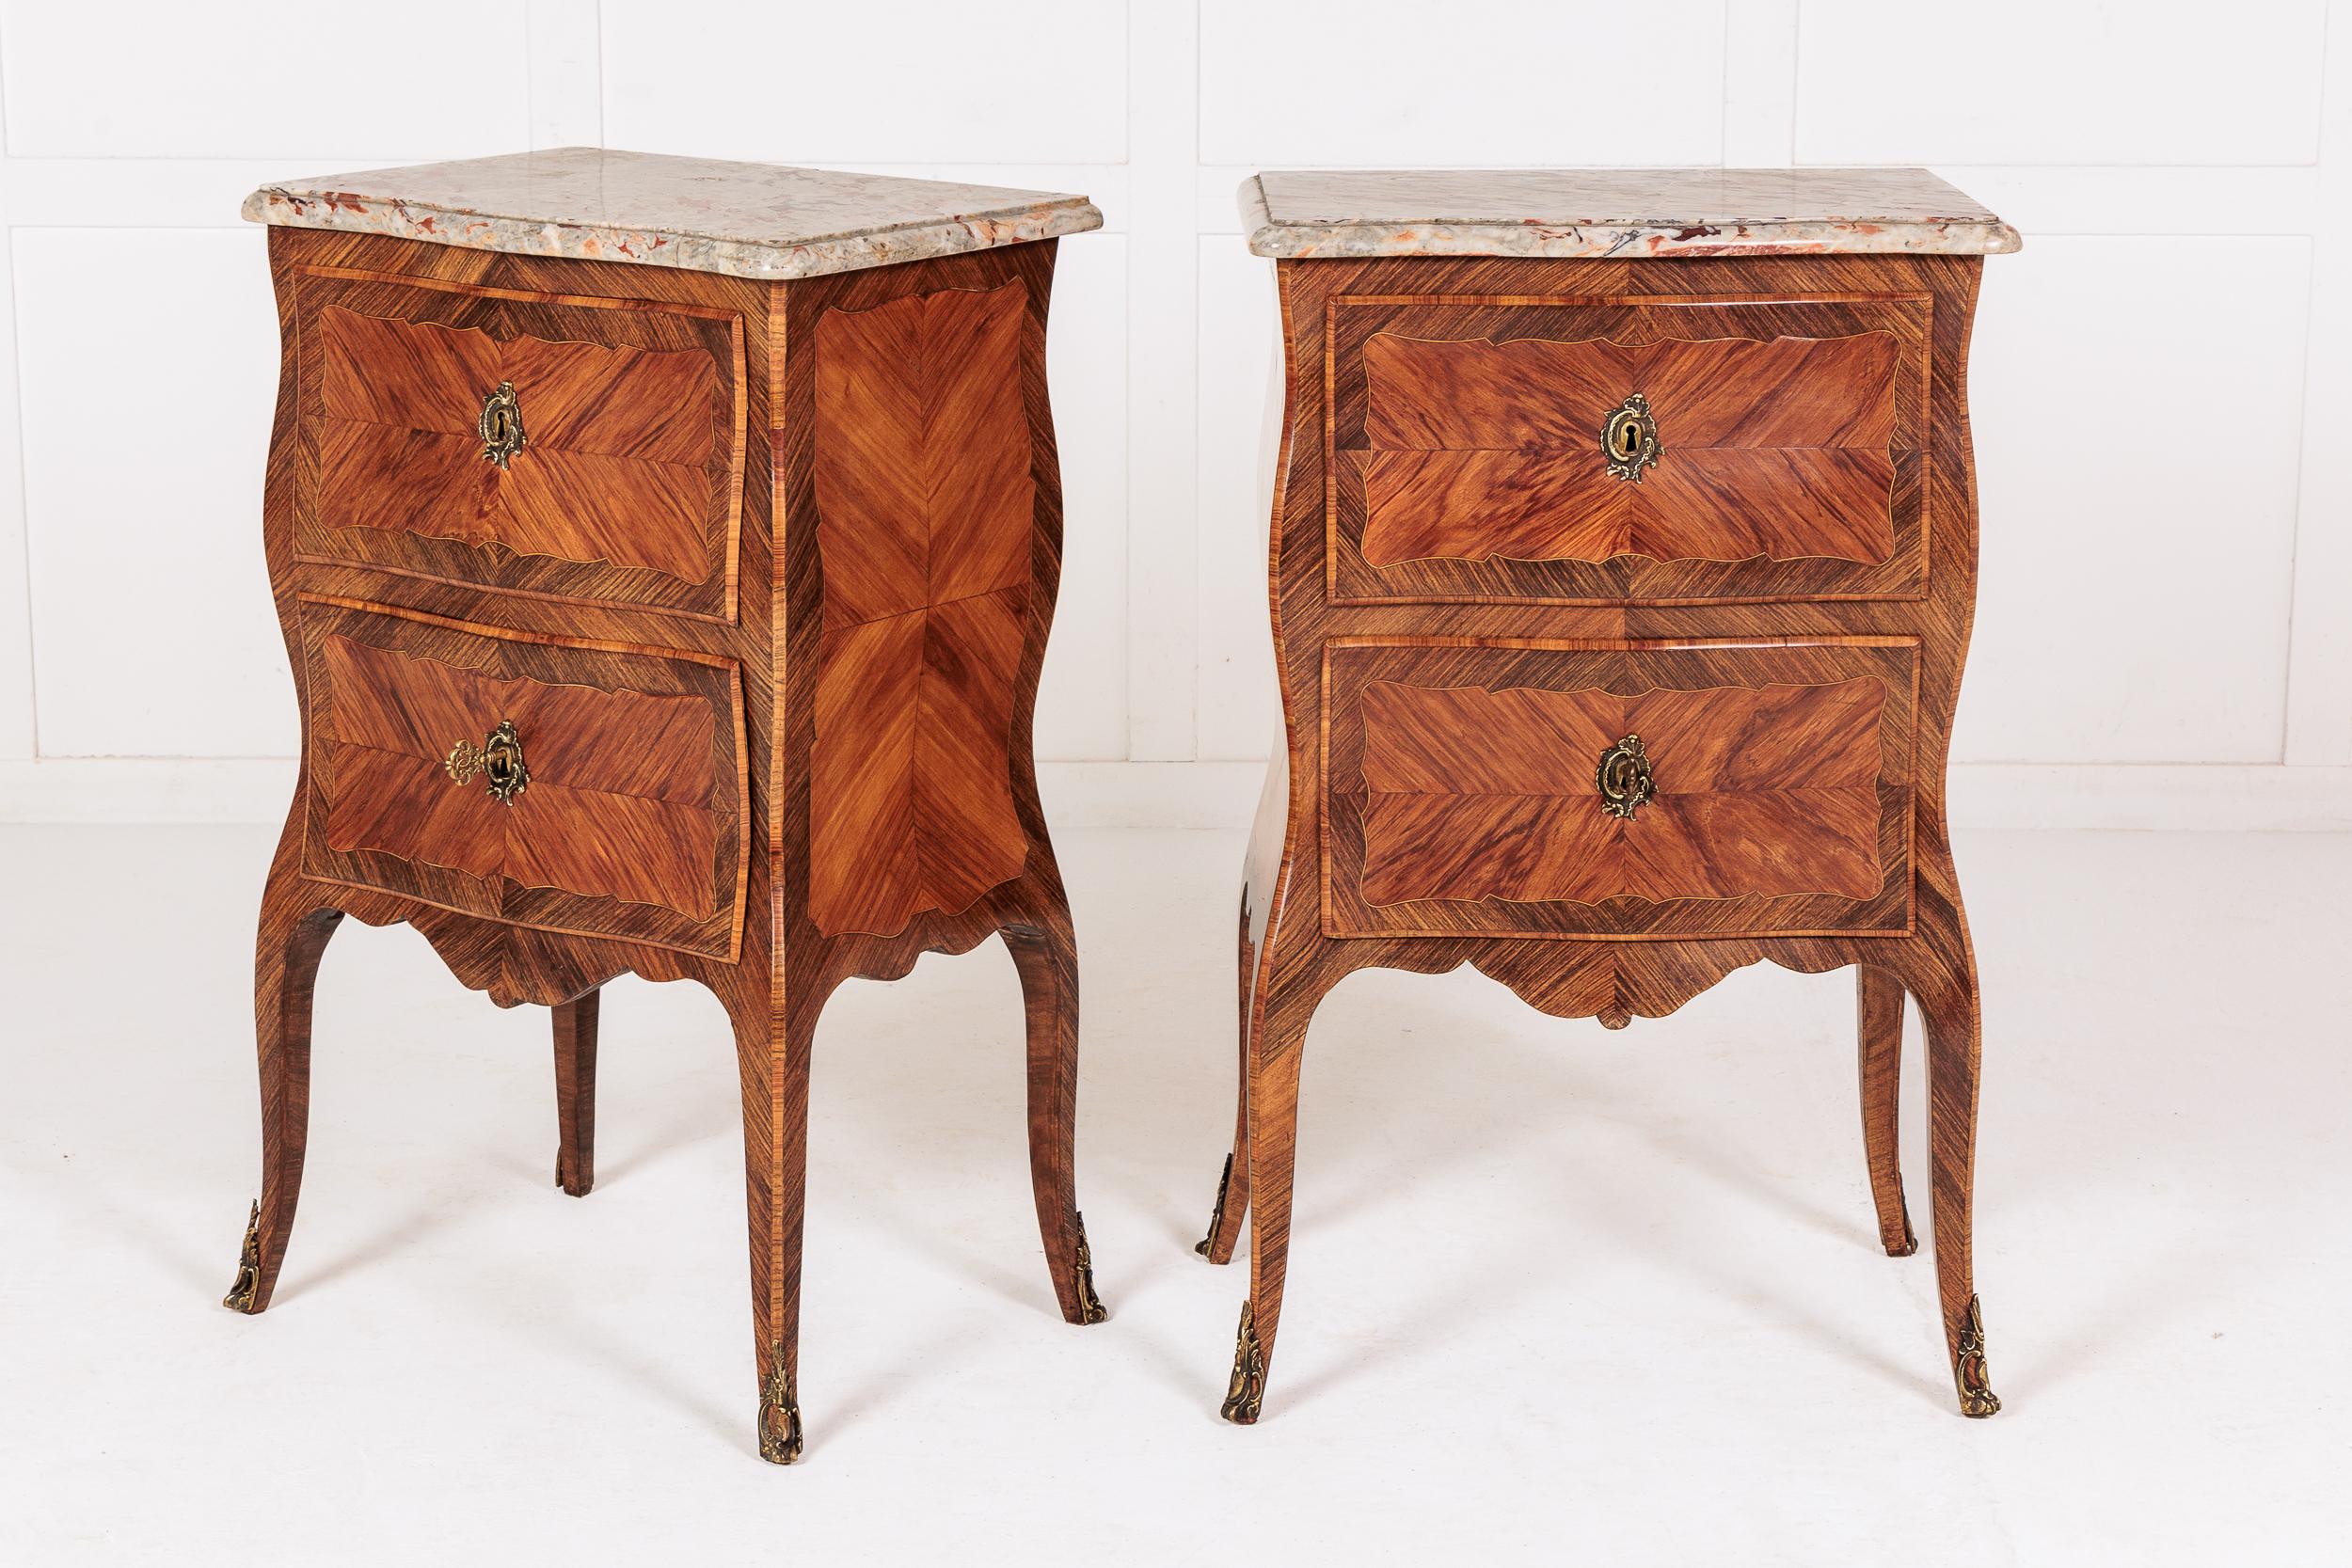 Pair of 19th Century Italian Bedside Cabinets with Marble Tops For Sale 1